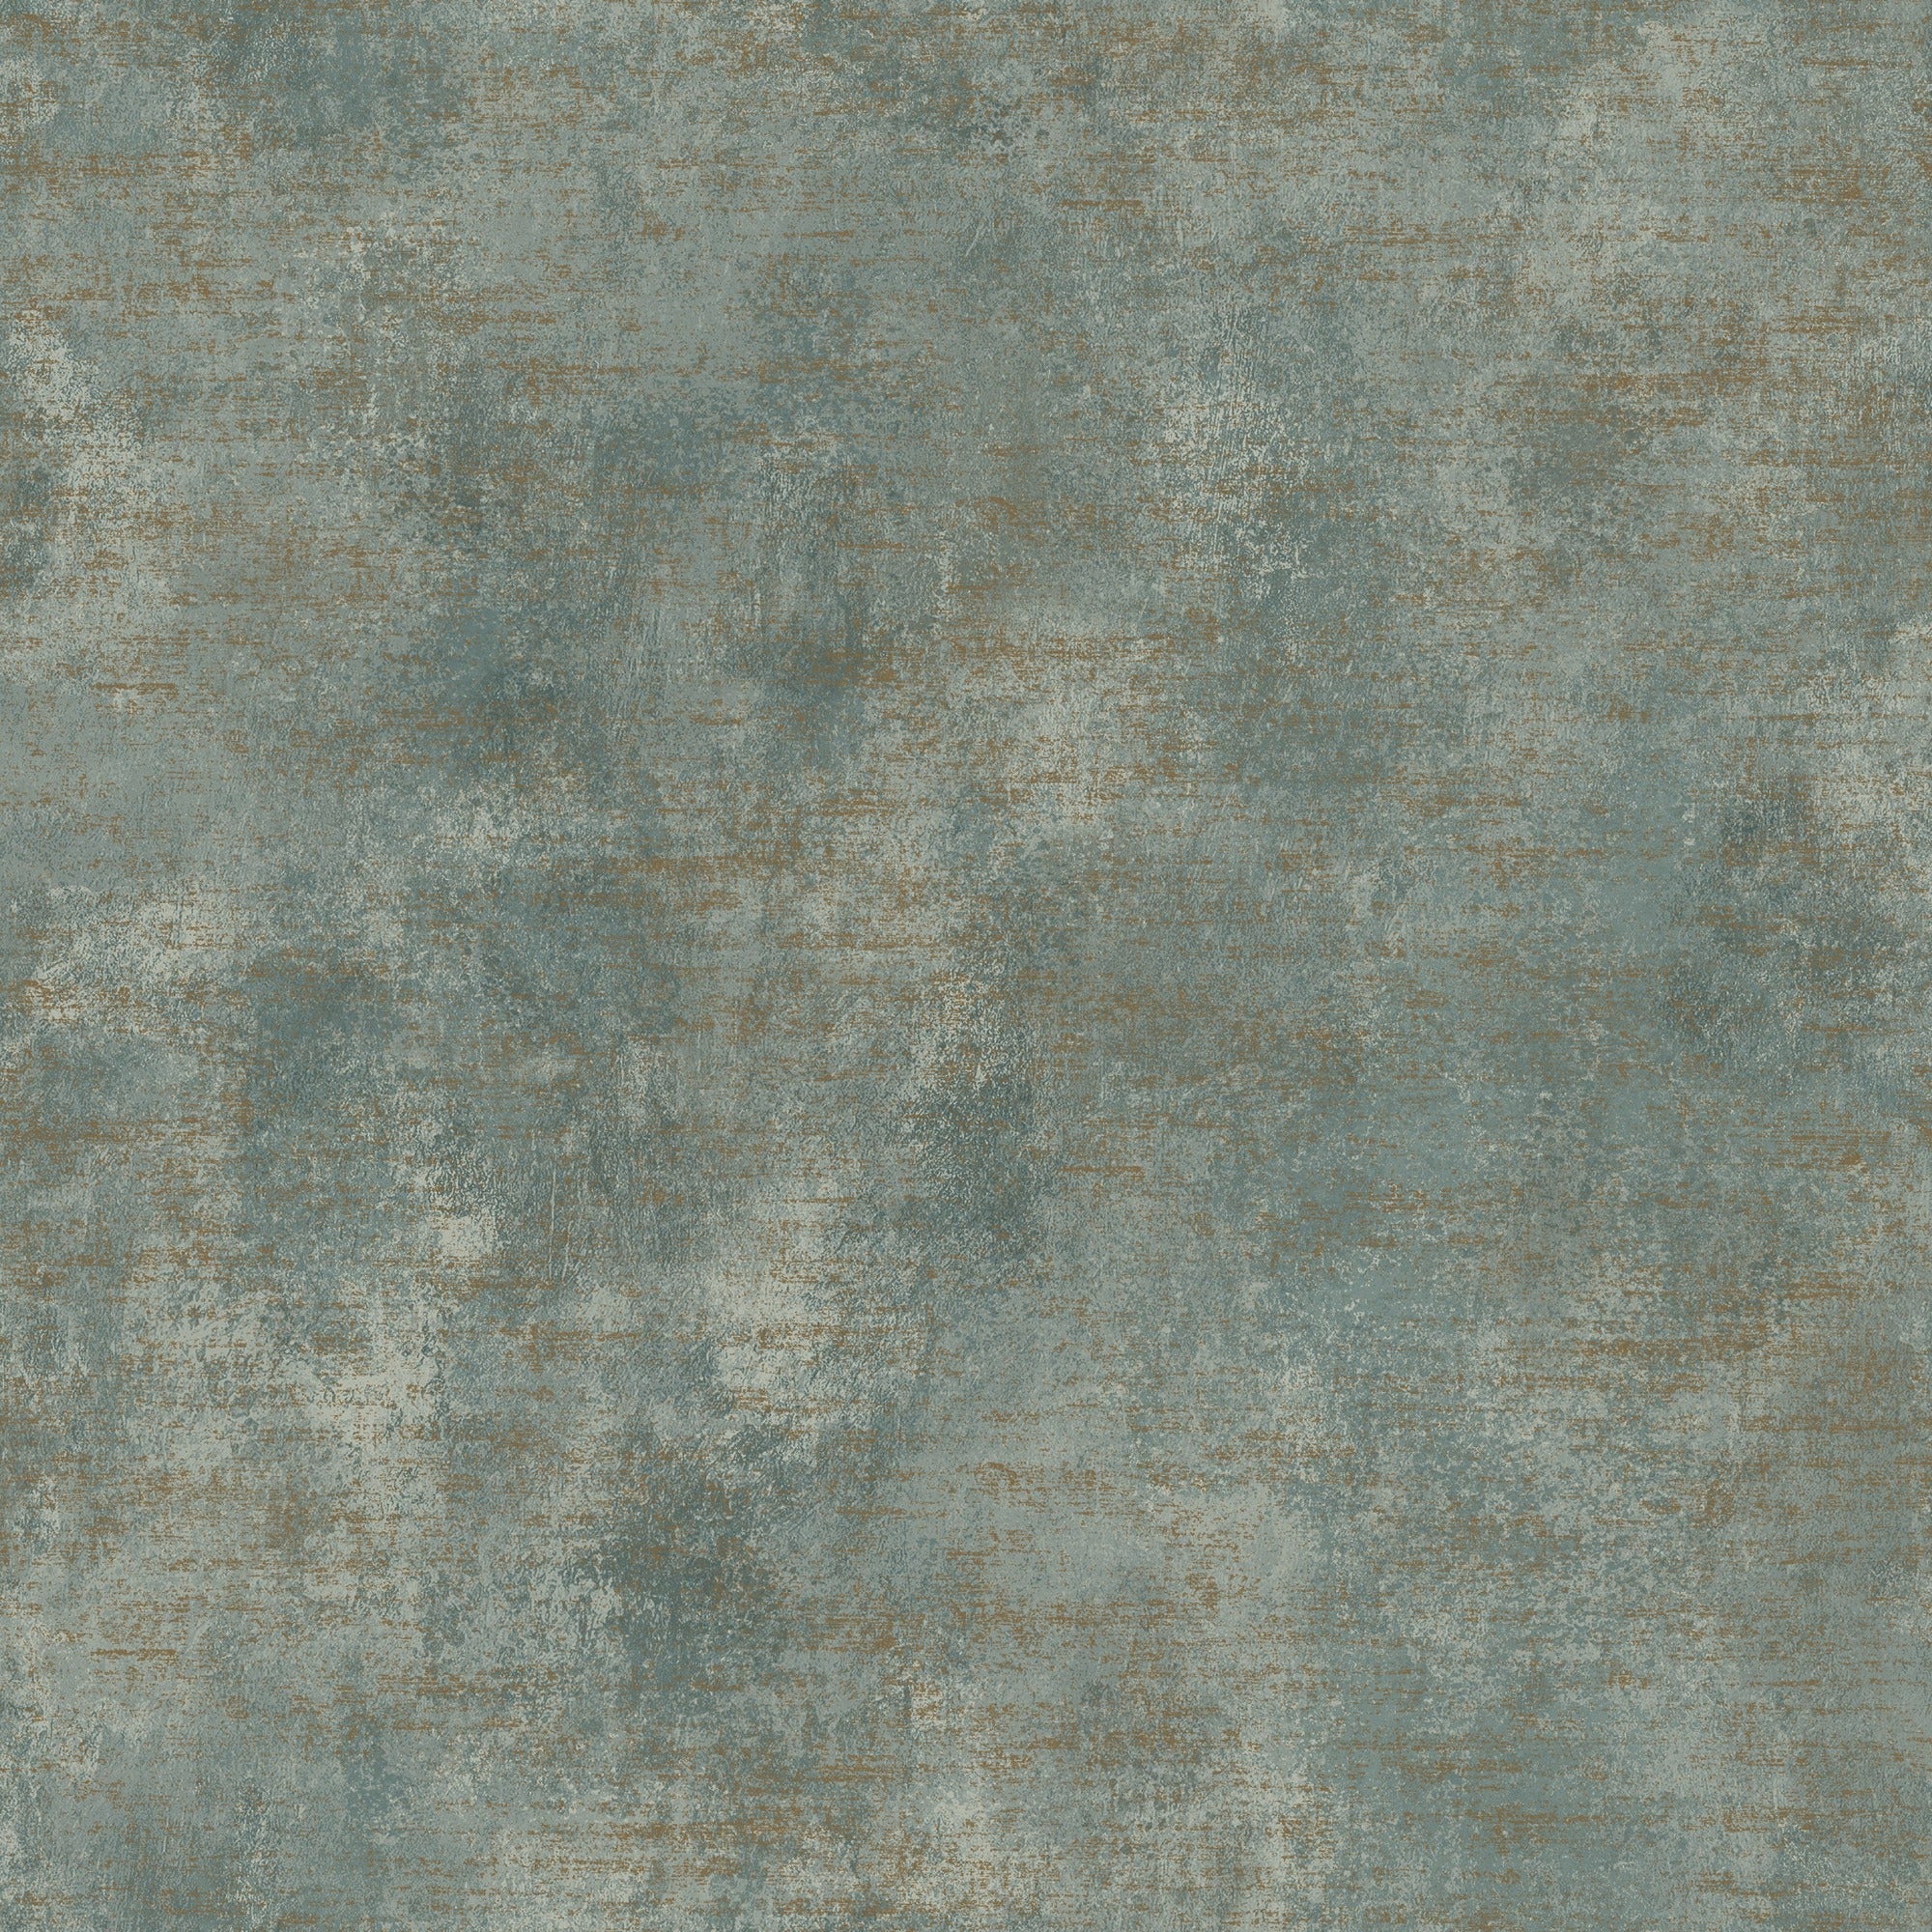 Textured Plain Teal Wallpaper | Grandeco Wallcoverings | A67902